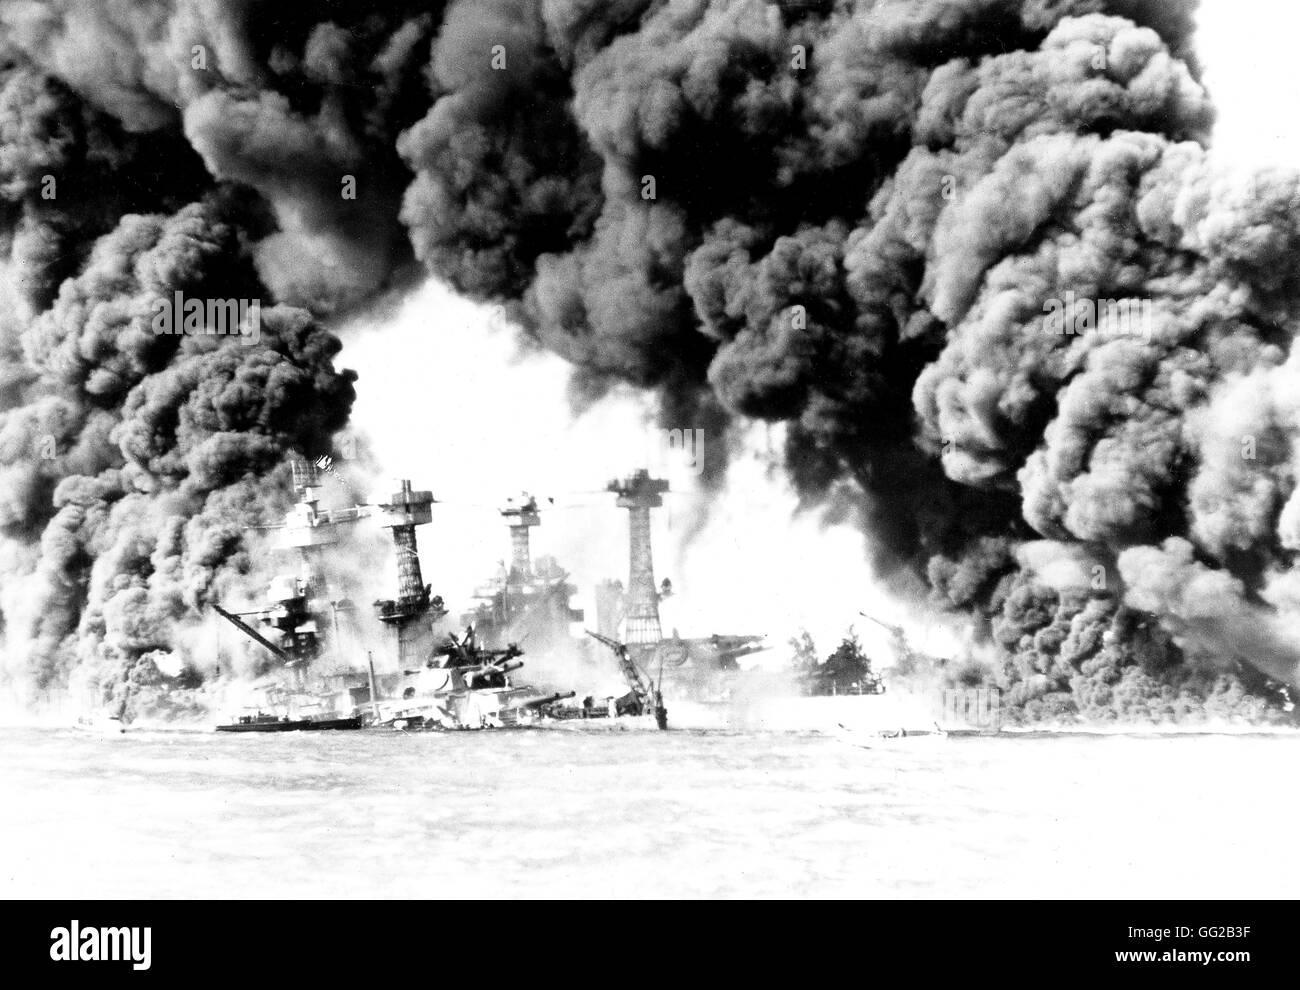 US ships 'Virginia' and 'Tennessee' on fire after the Pearl Harbor attack  December 7, 1941 World War II Washington, National archives Stock Photo